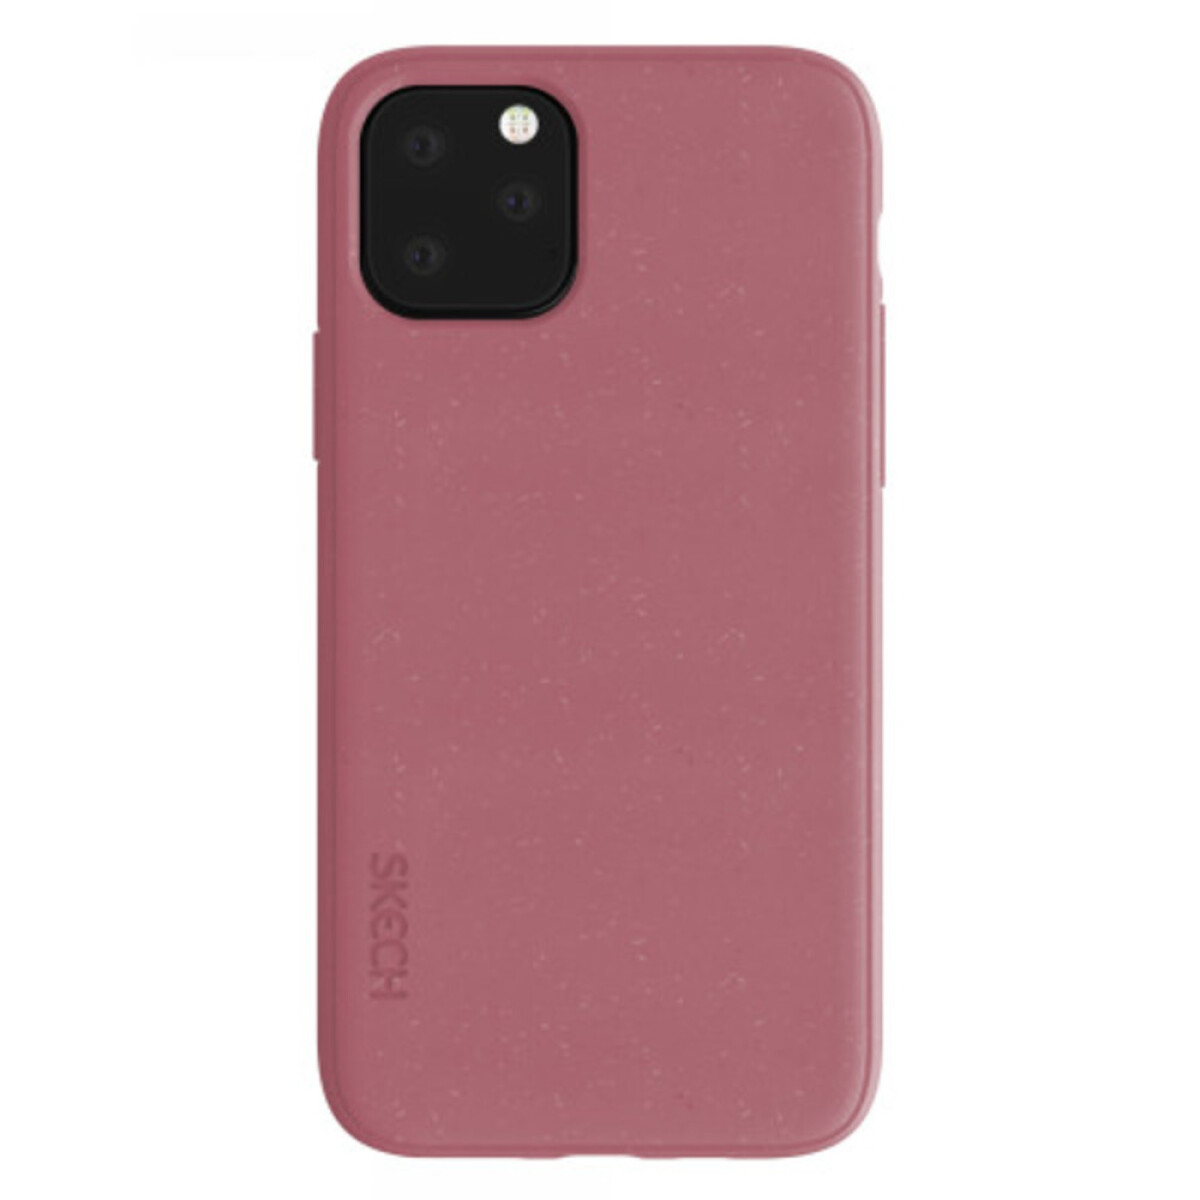 SKECH BioCase iPhone 11 Pro Max, iPhone Apple, Bookcover, 11 violett, Max Pro Pink